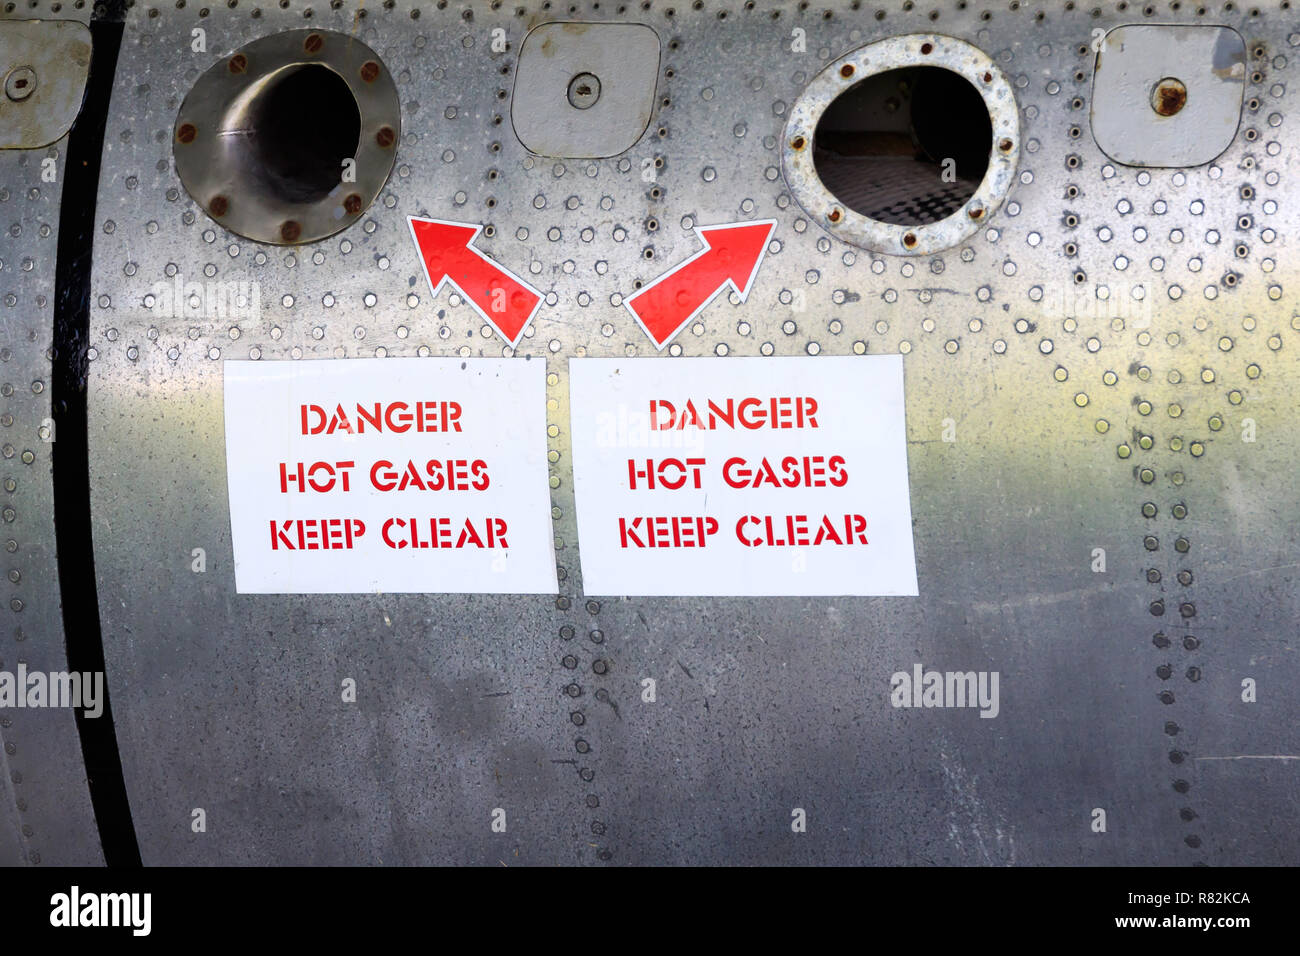 Danger hot gases, keep clear sign Stock Photo